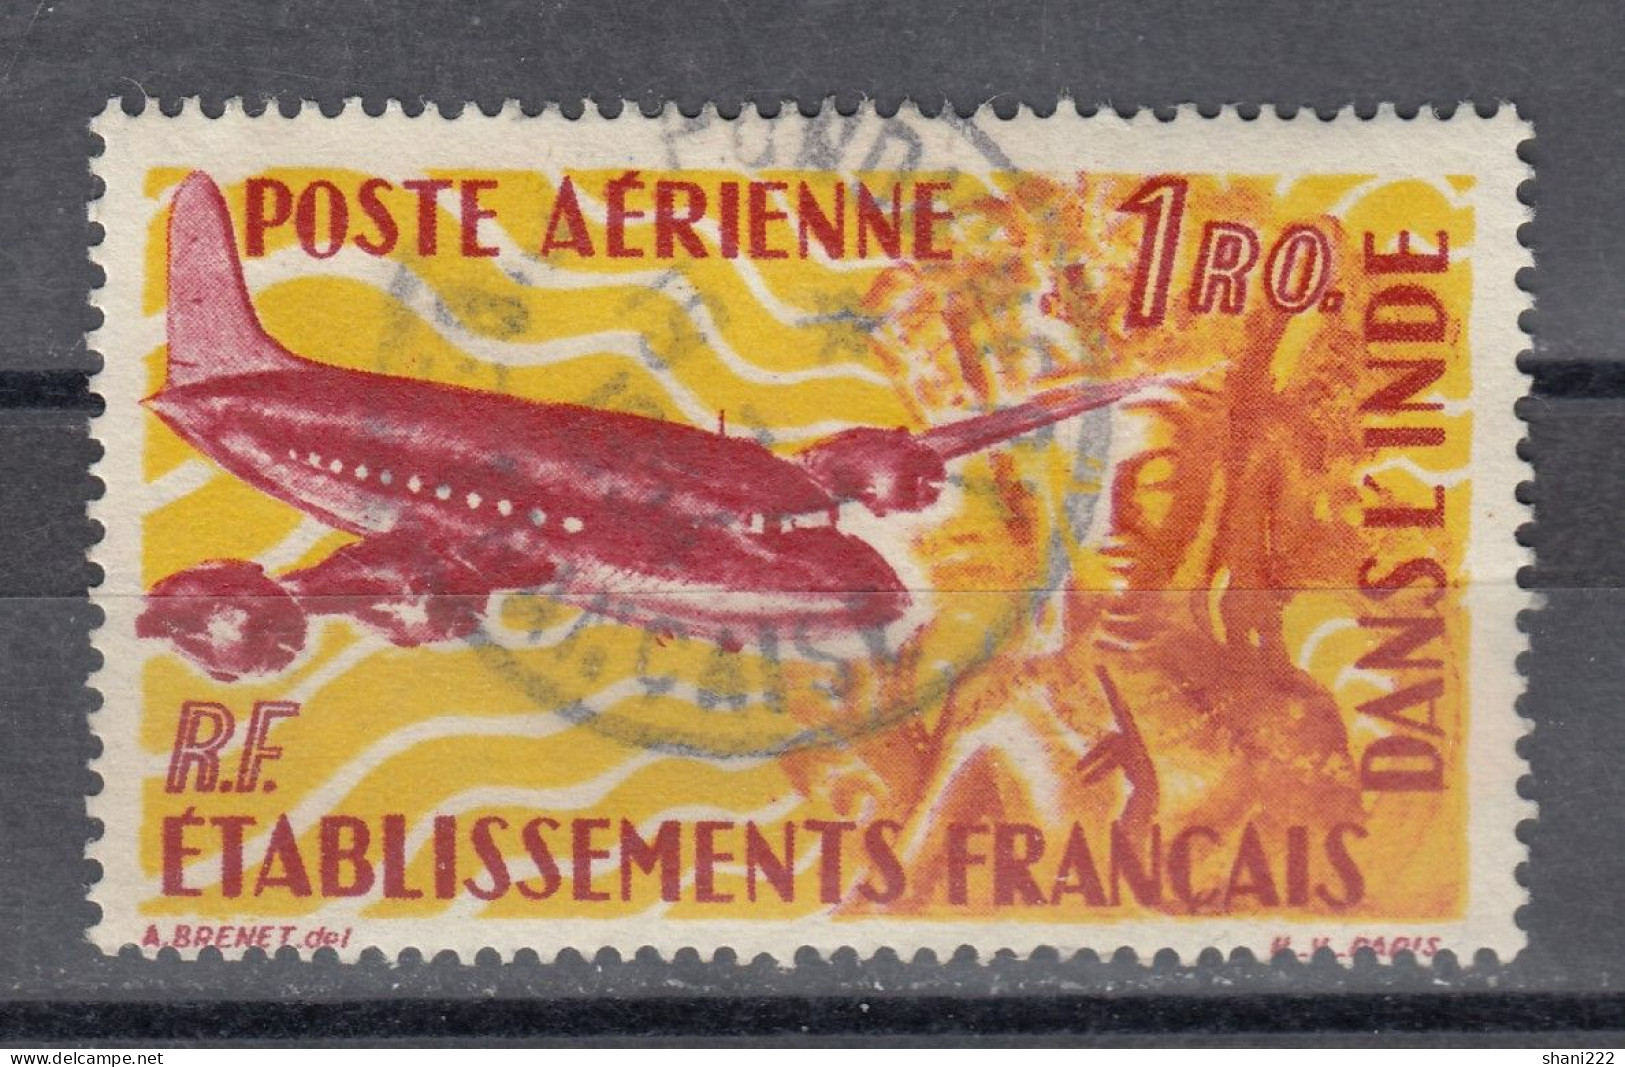 India - French Establishments, 1949 Airs  2 Ro Used  (e-219) - Oblitérés